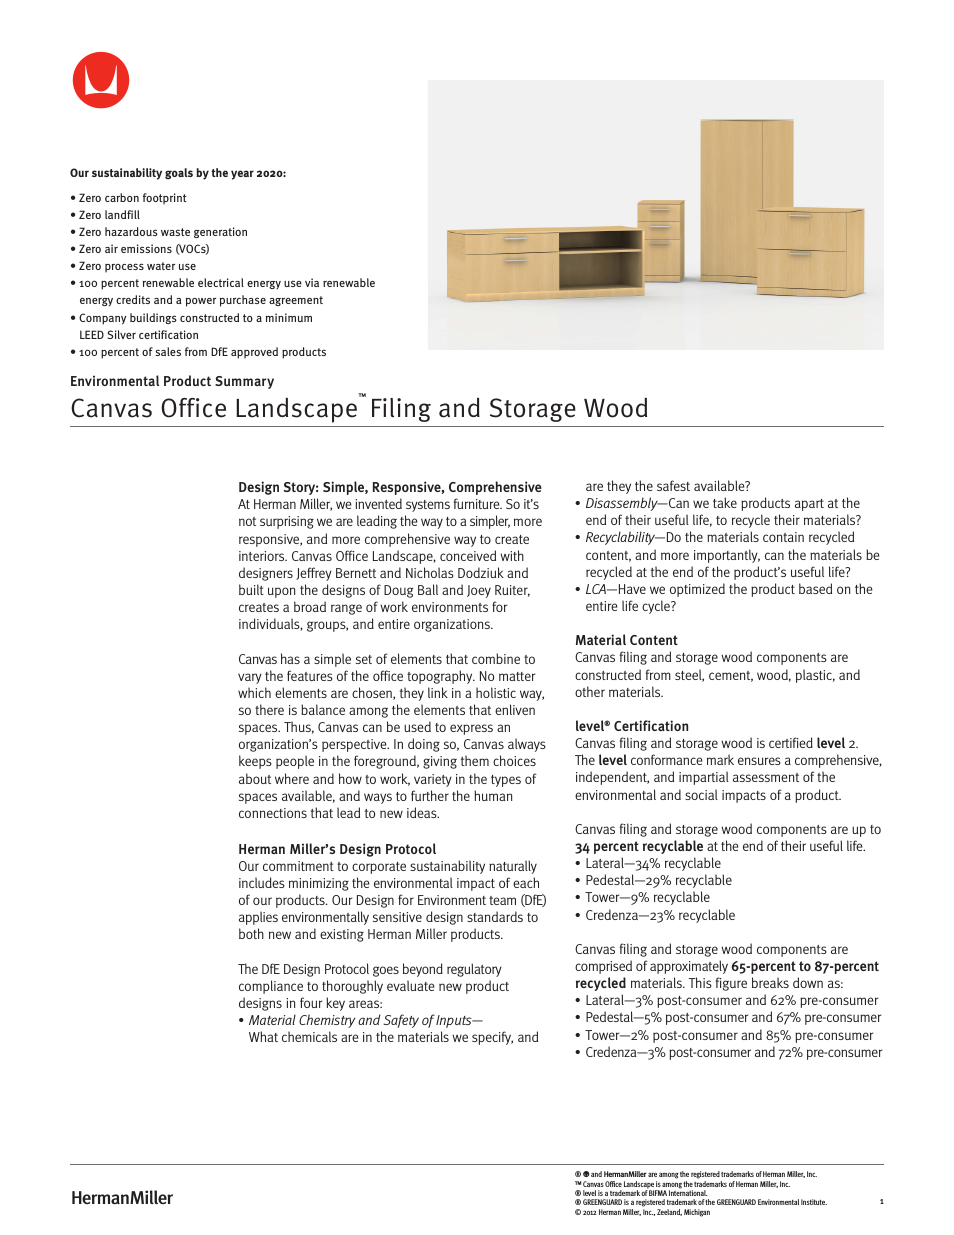 Canvas Office Landscape Filing and Storage Wood - Environmental Product Summary